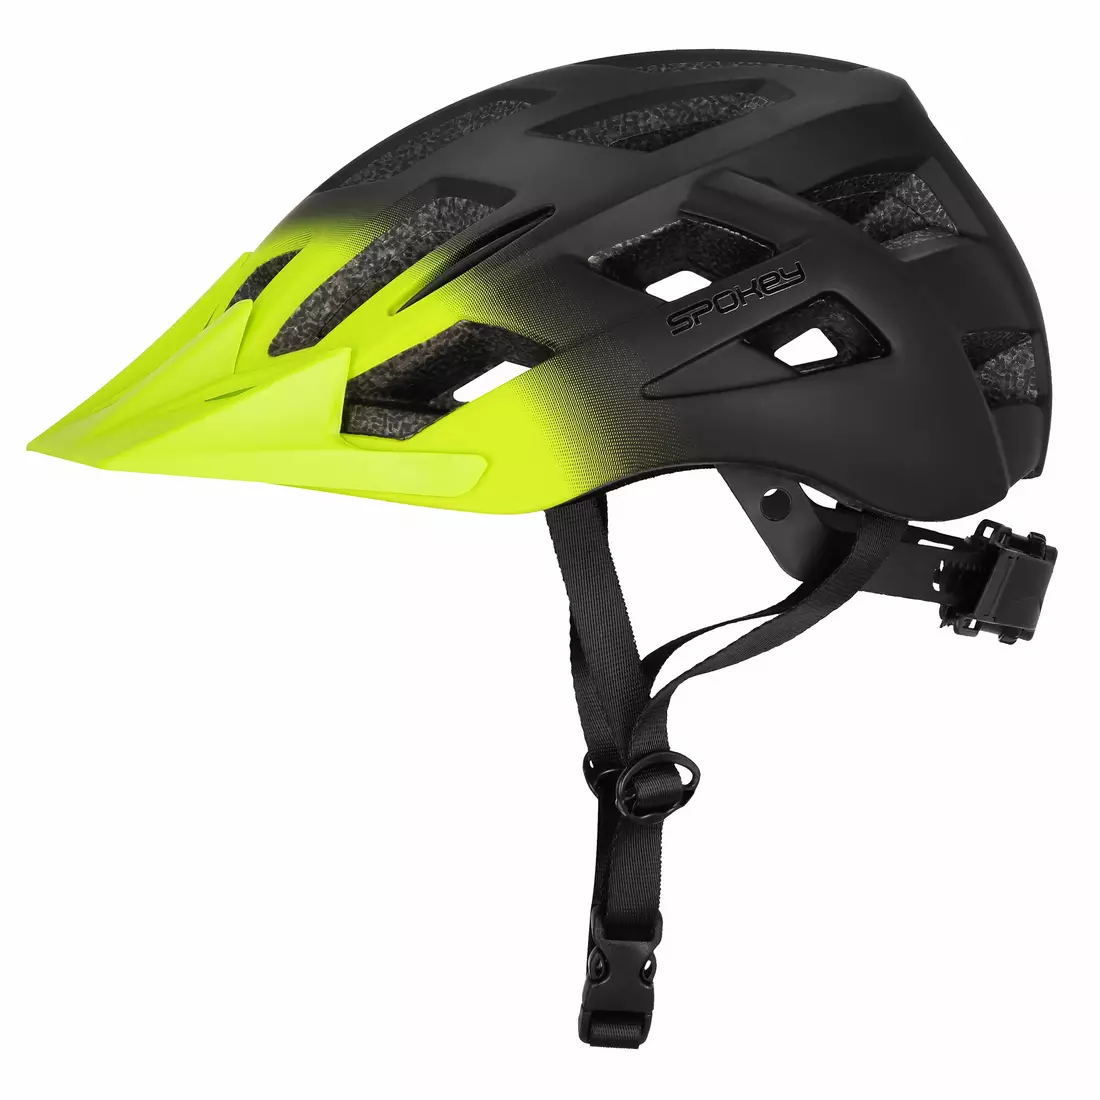 SPOKEY POINTER bicycle helmet with turn signals 58-61 cm 